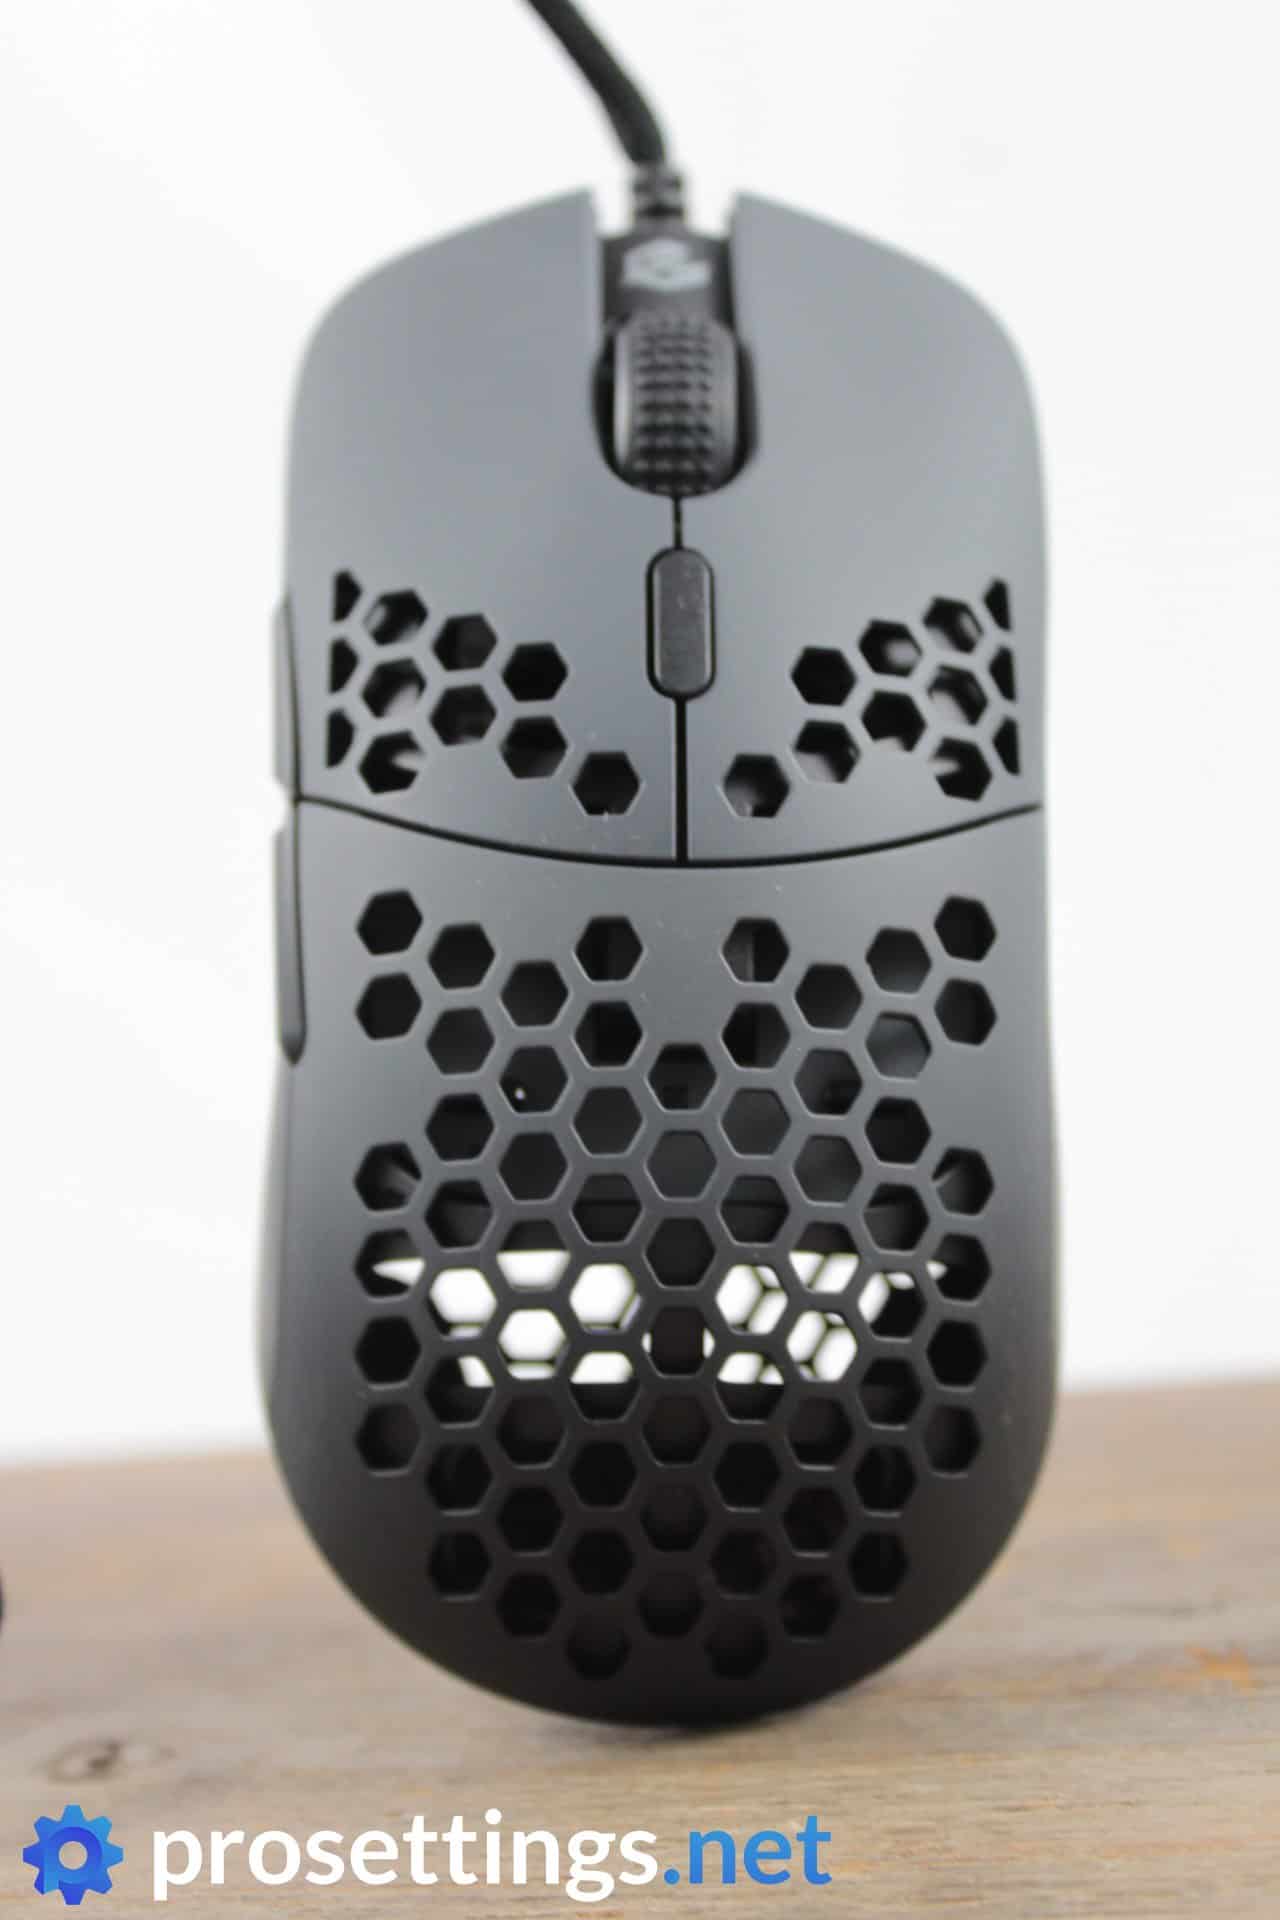 G-Wolves HT-M Review Mouse Top